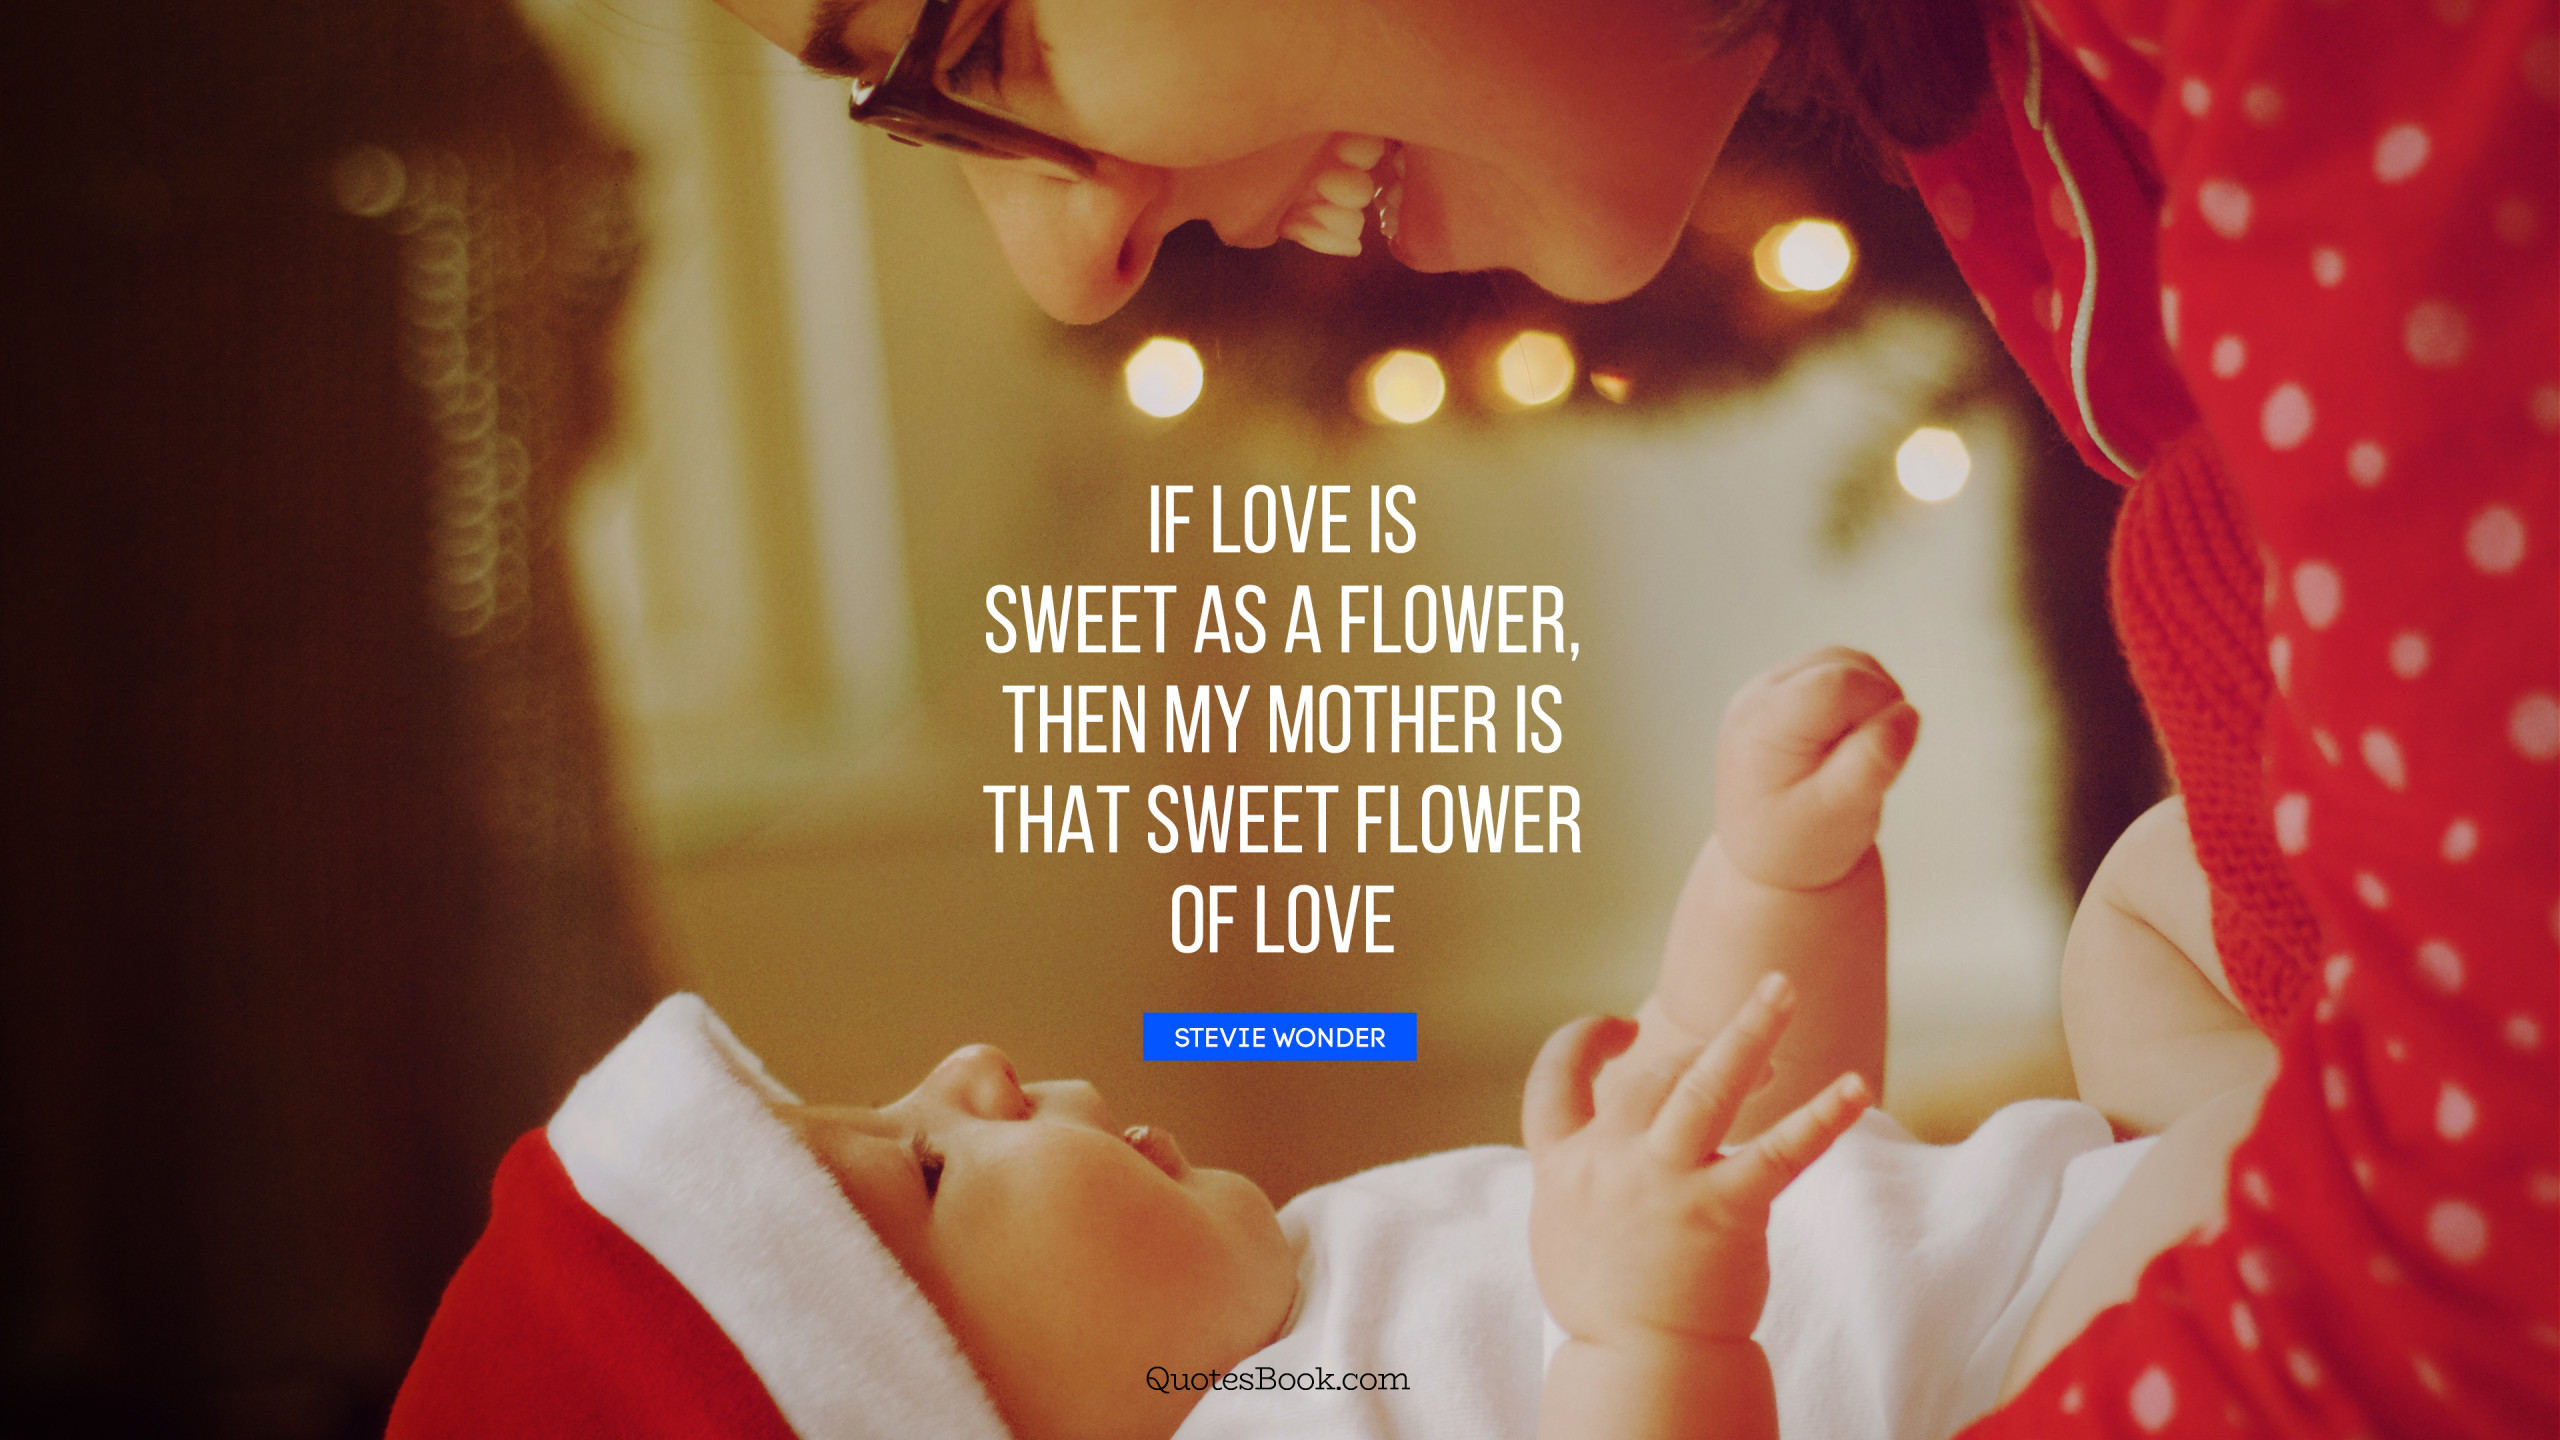 If love is sweet as a flower, then my mother is that sweet flower of love. - Quote by Stevie Wonder - QuotesBook